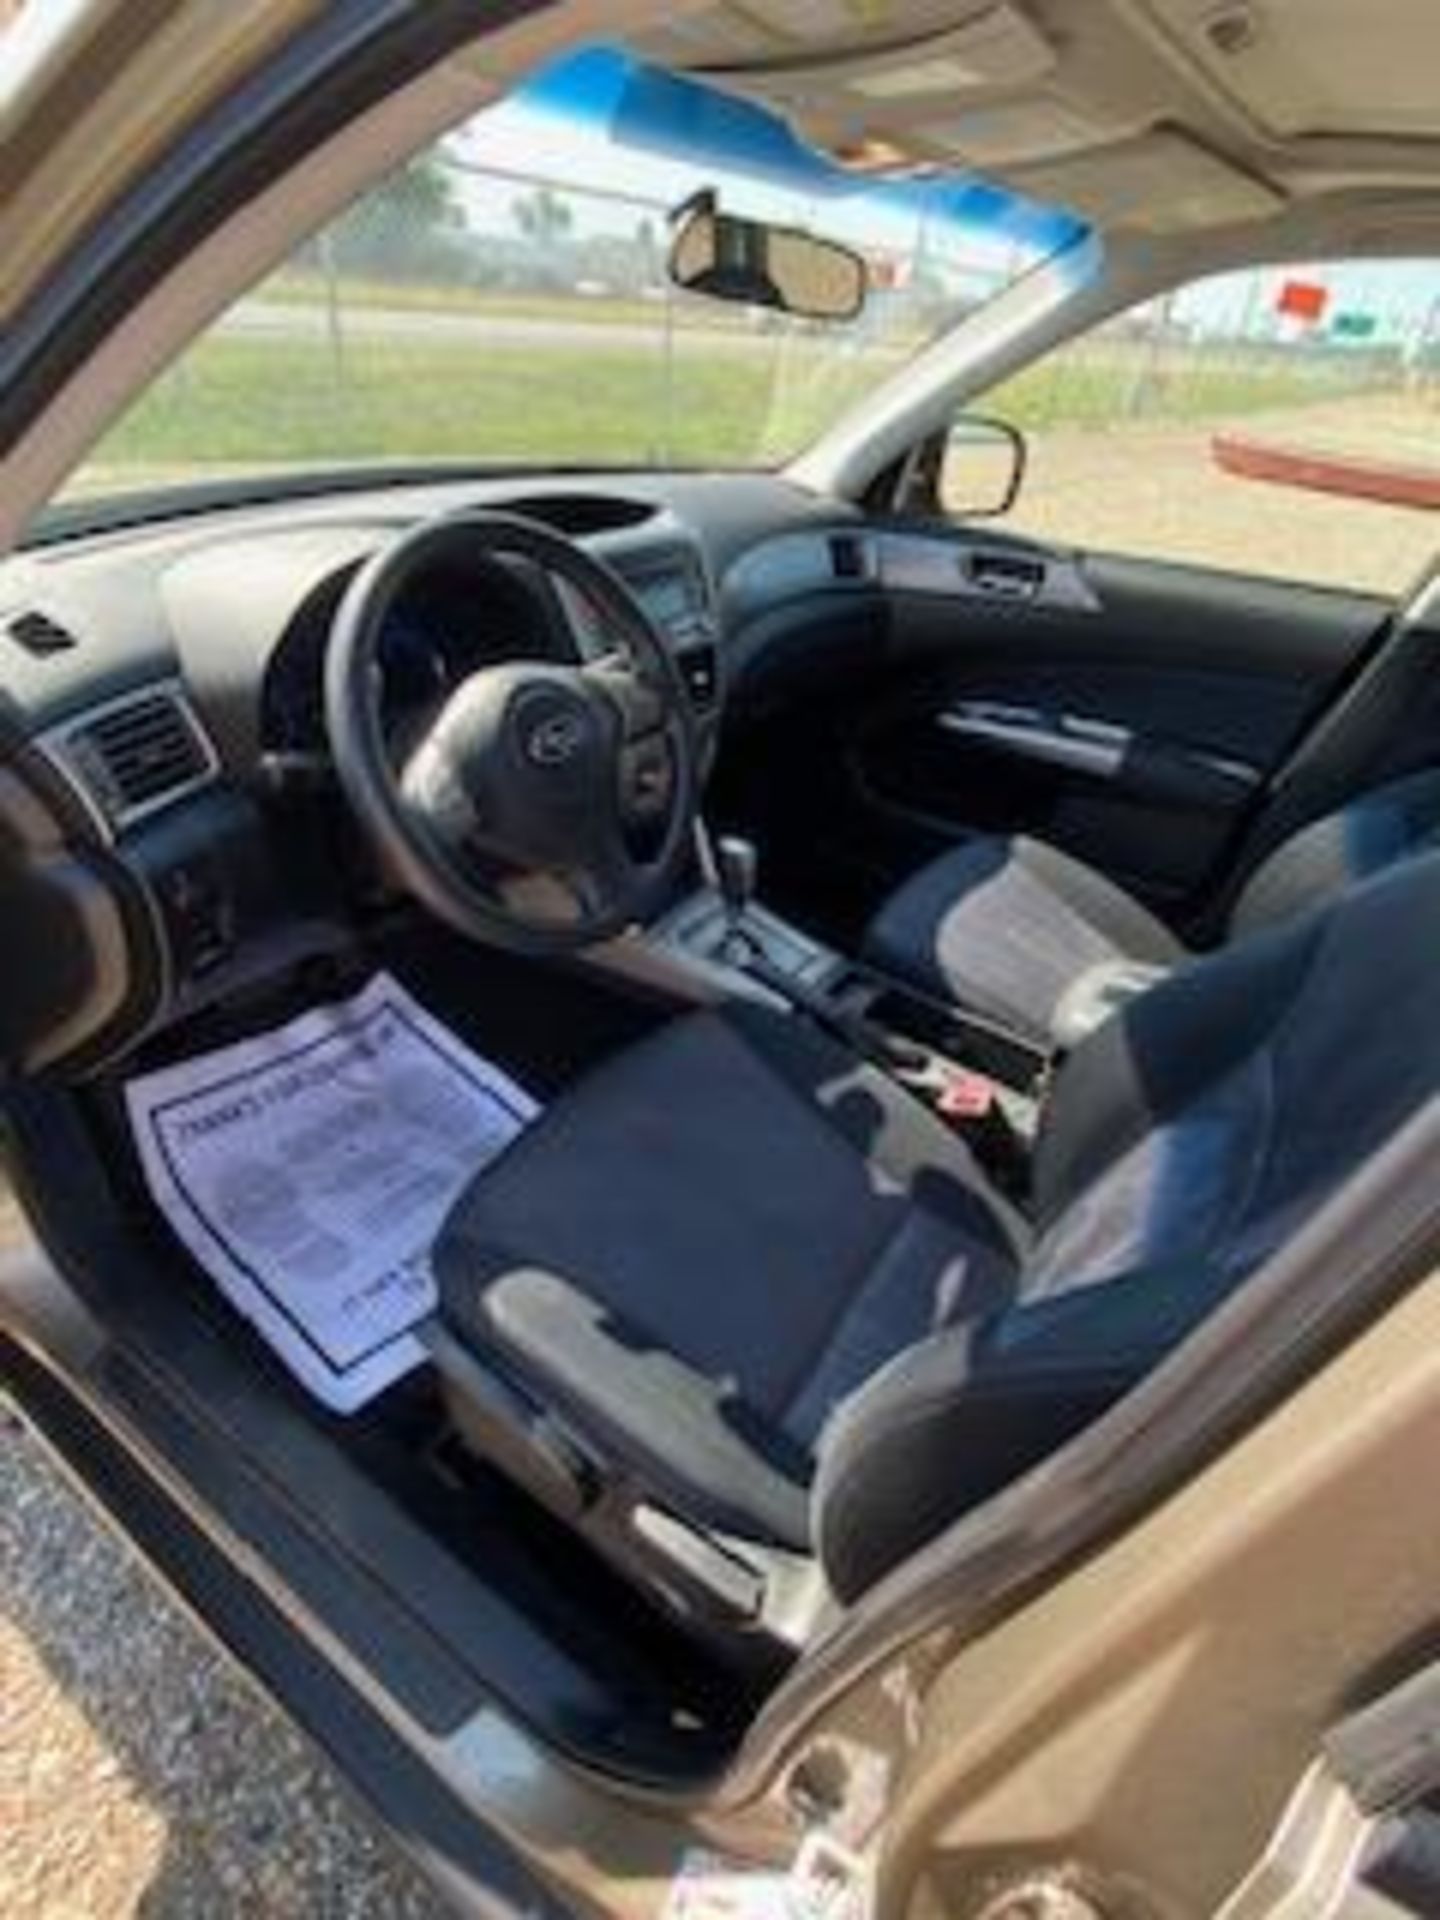 2009 SUBARU FORRESTER   AWD 126K MILES   NEW TIRES     SUNROOF A LOT OF OPTIONS CLEAN CAR - Image 6 of 9